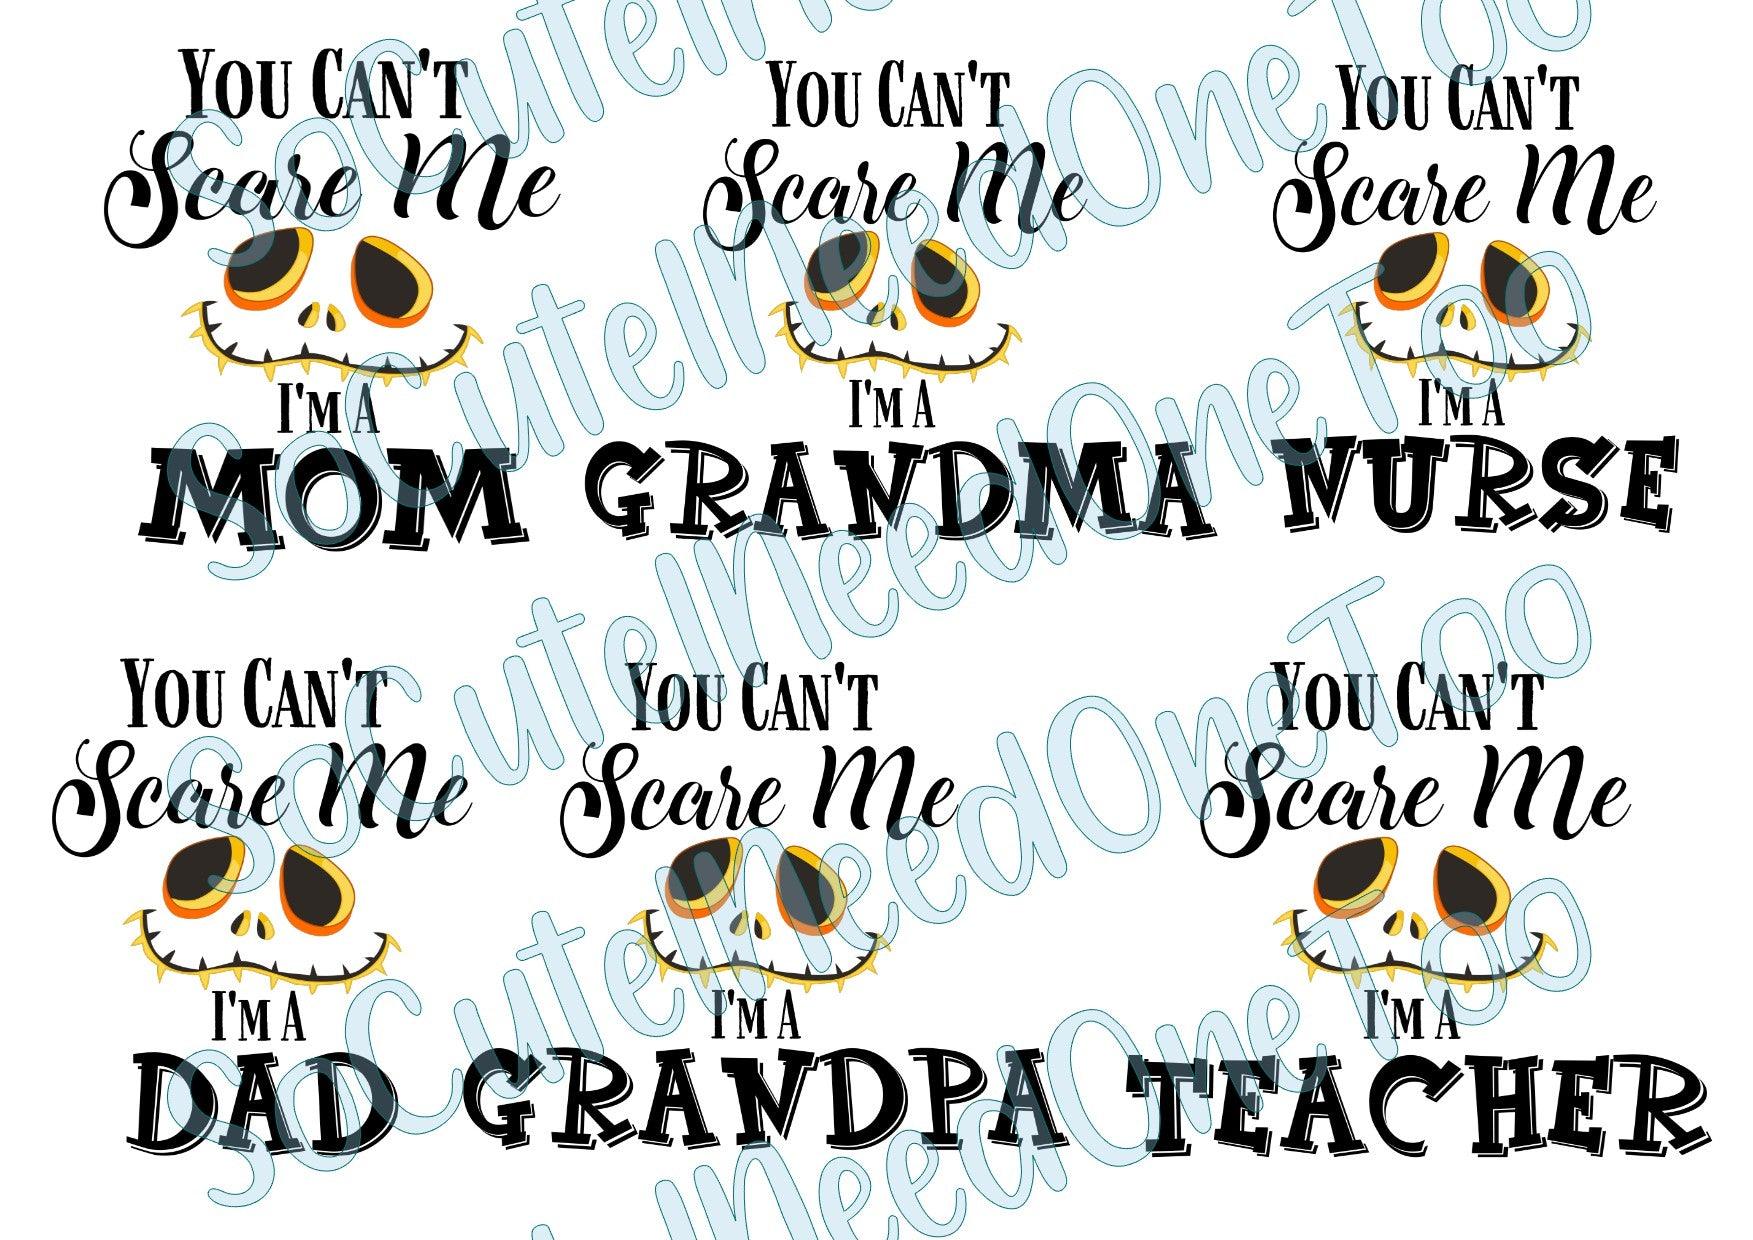 Jack - You Can't Scare Me - on Clear/White Waterslide Paper Ready To Use - SoCuteINeedOneToo